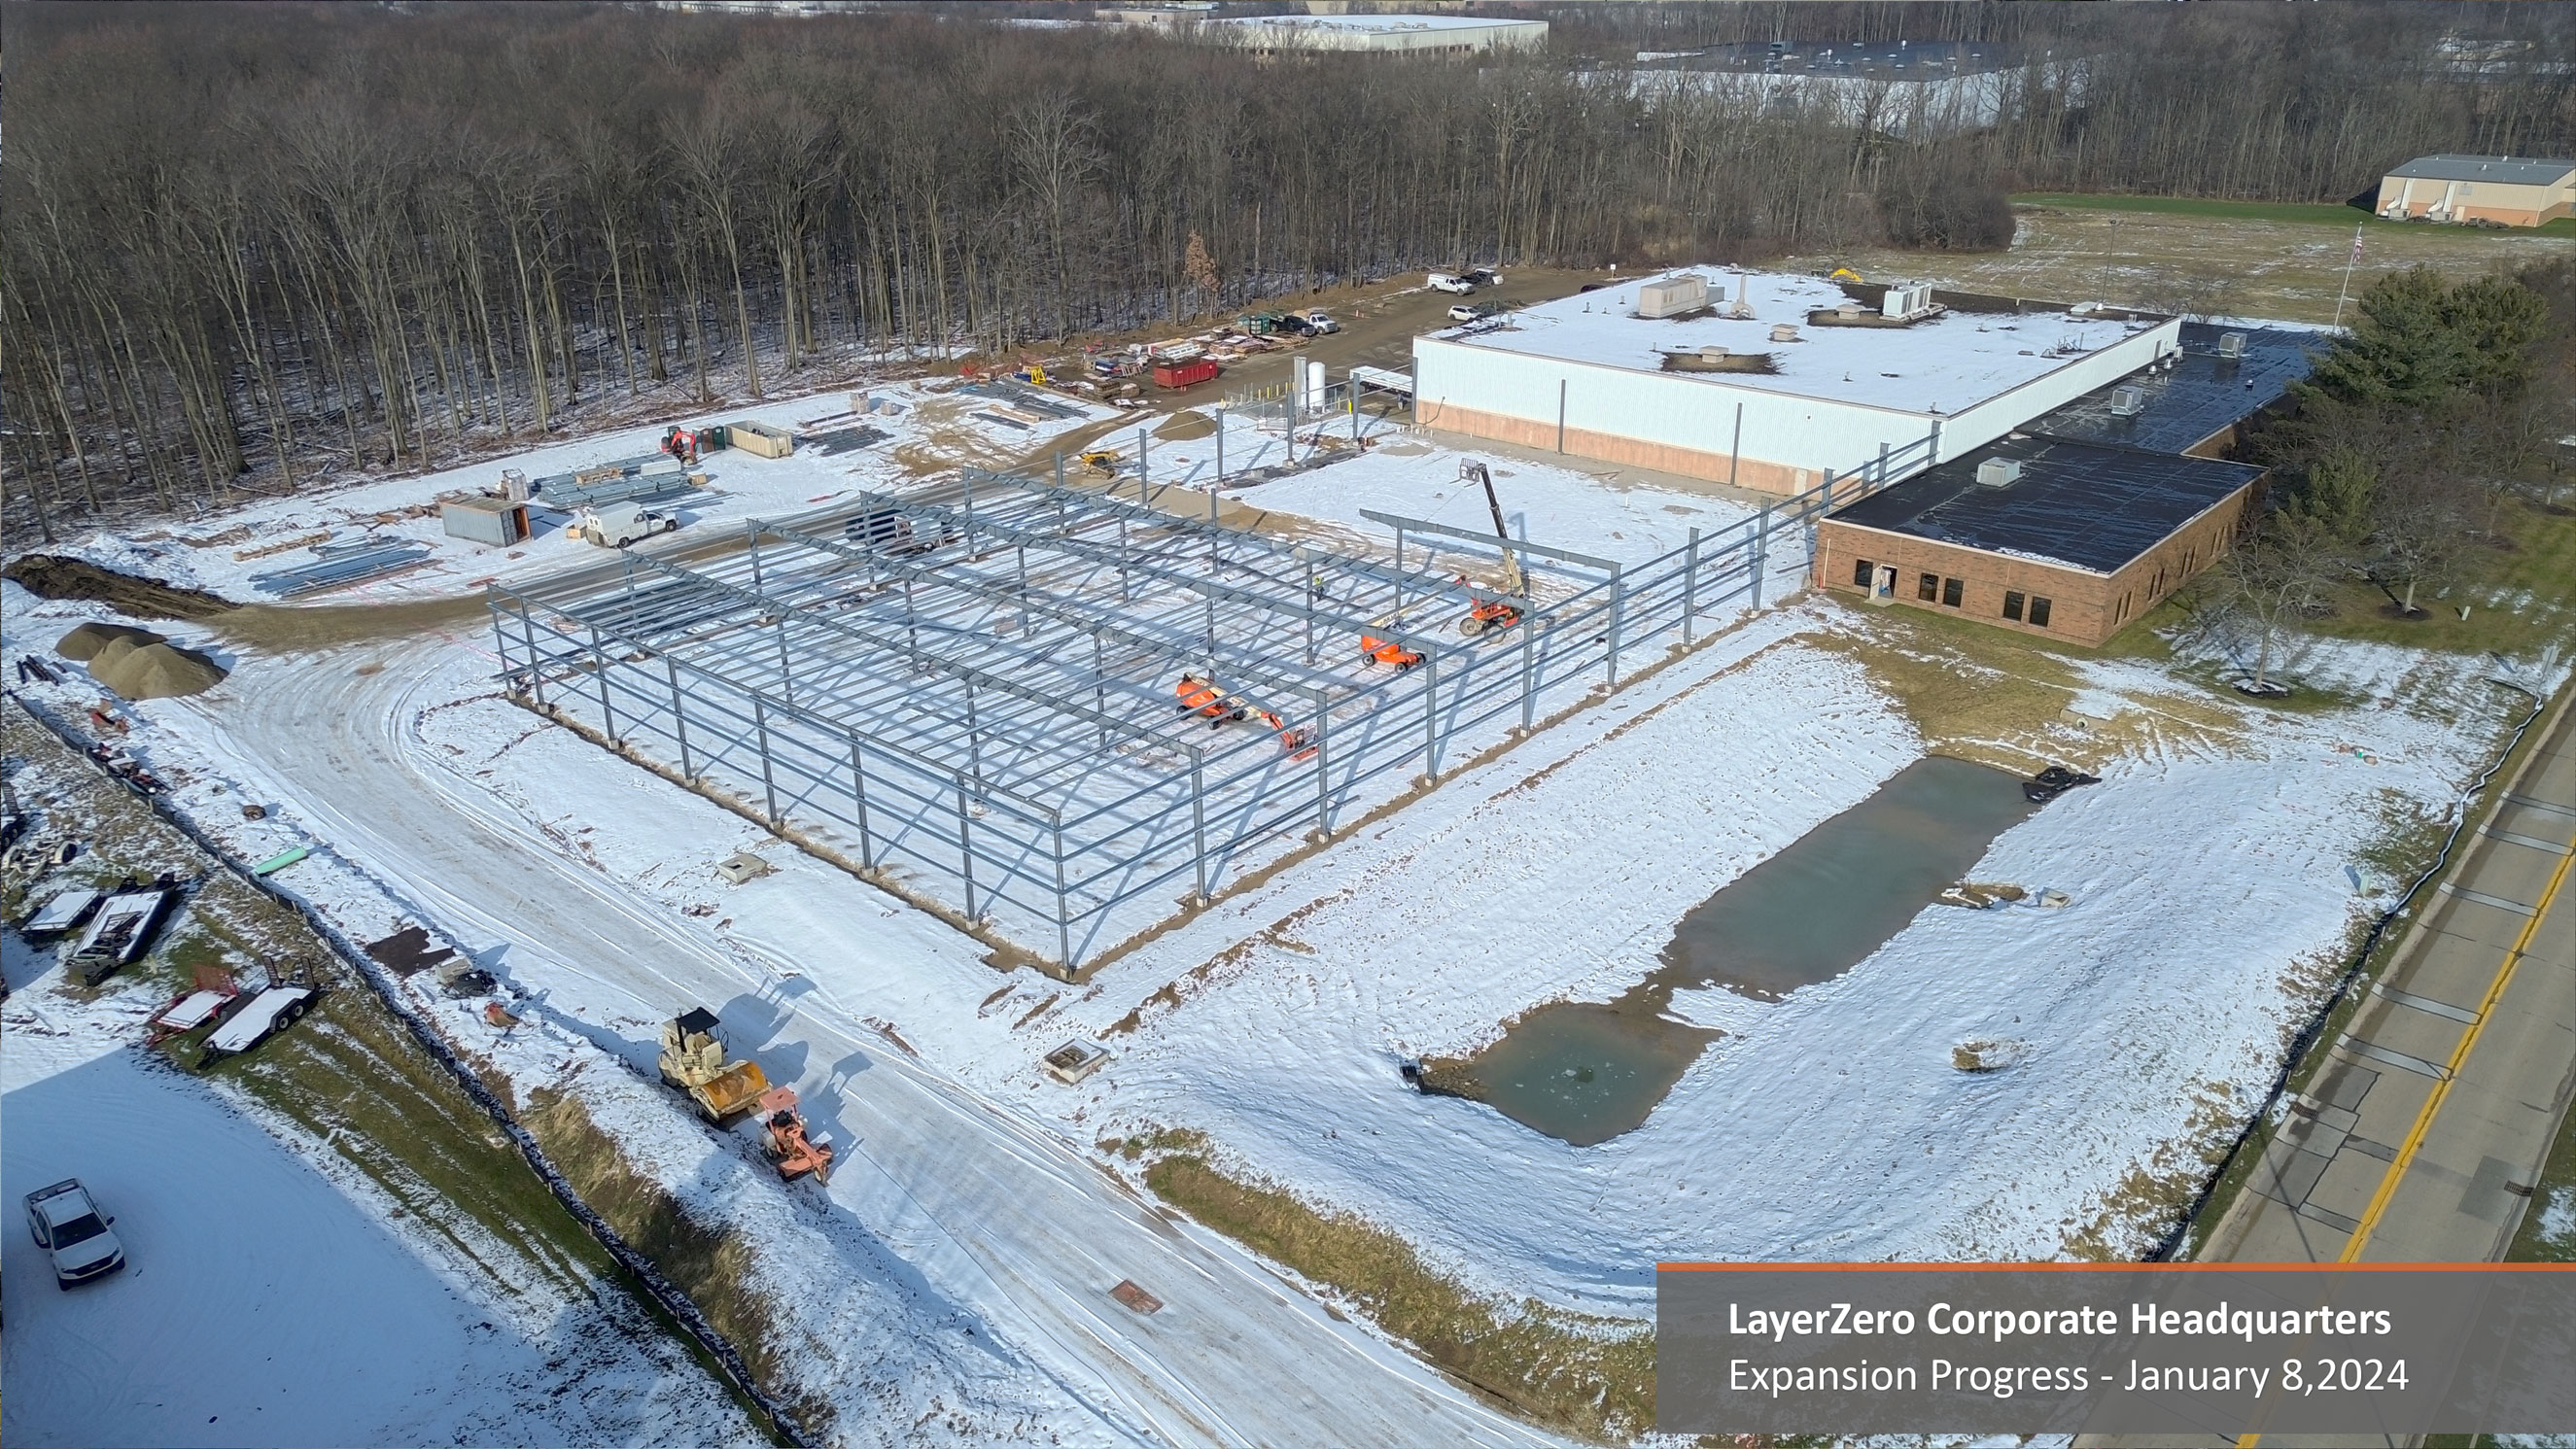 The steel frame is being installed at the LayerZero Expansion Project